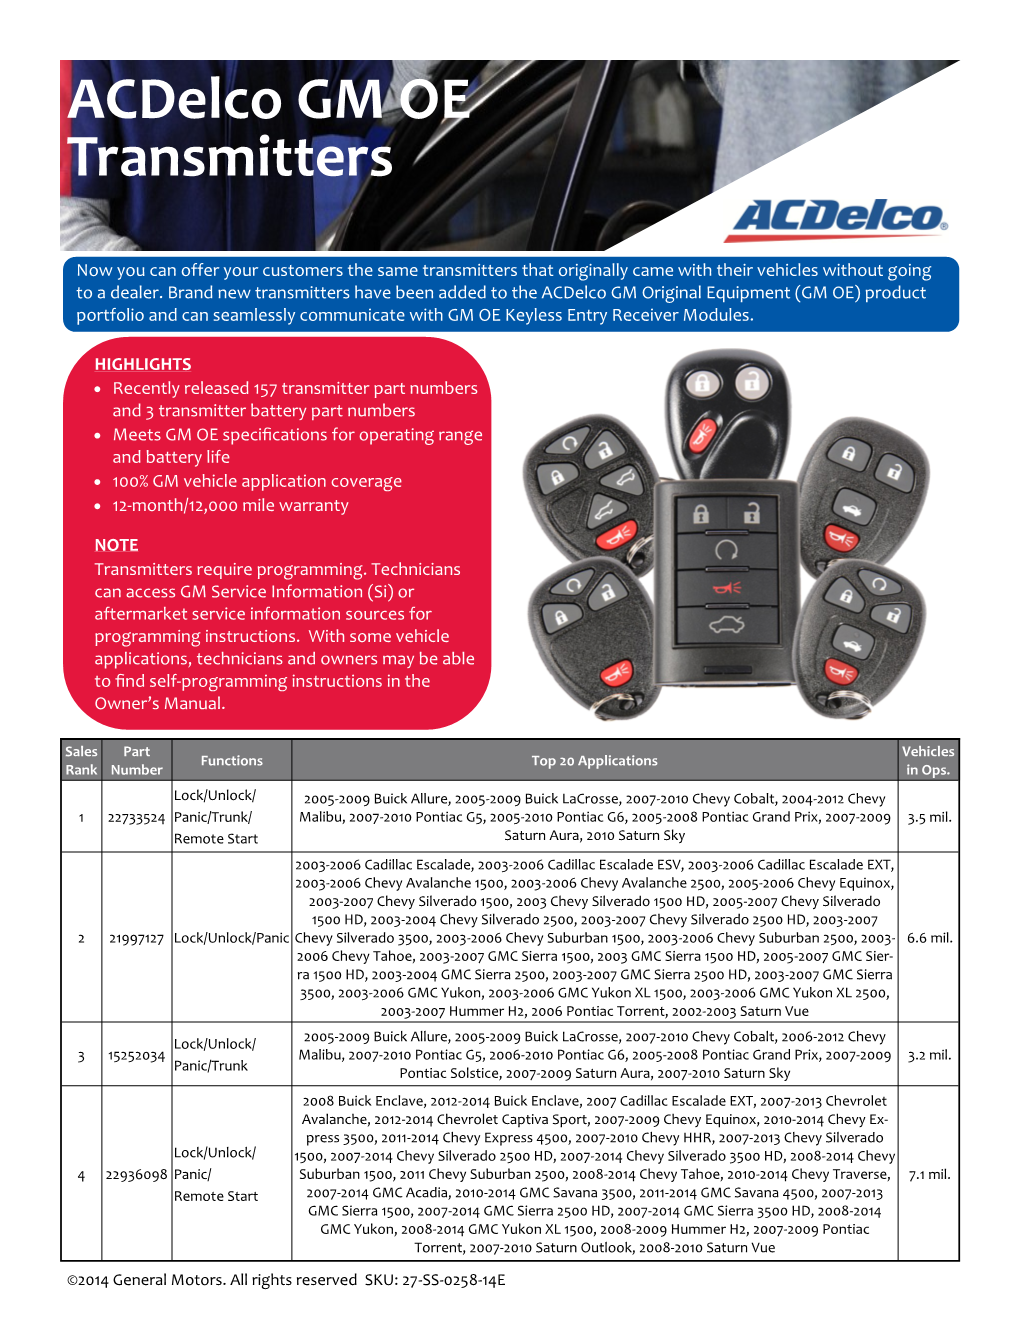 Acdelco GM OE Transmitters